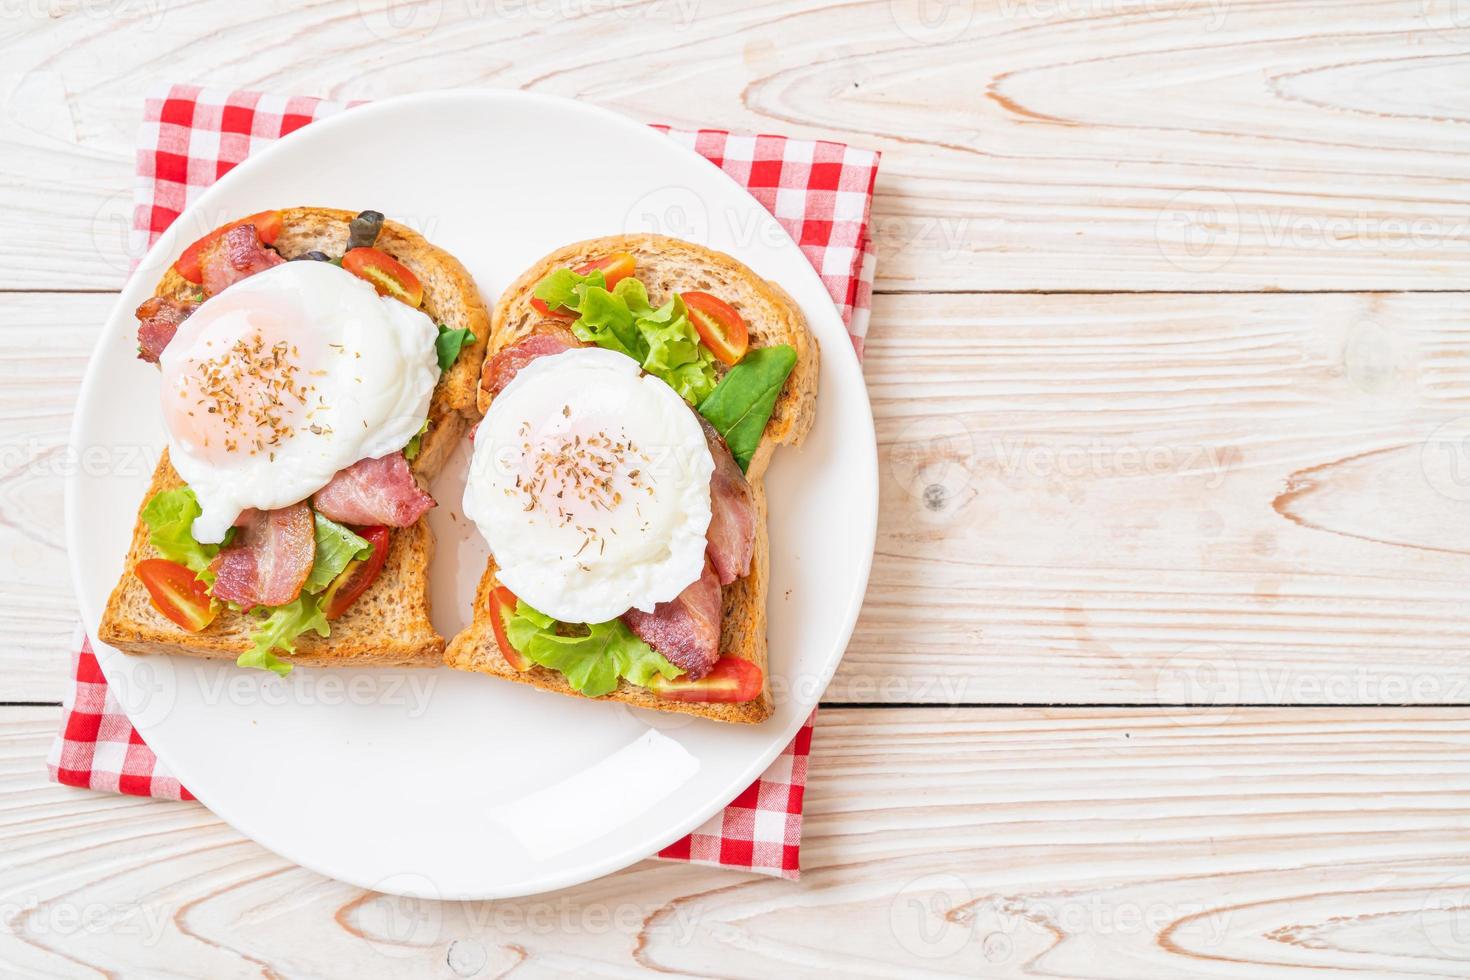 Whole wheat bread toasted with vegetable, bacon, and egg or egg benedict, for breakfast photo